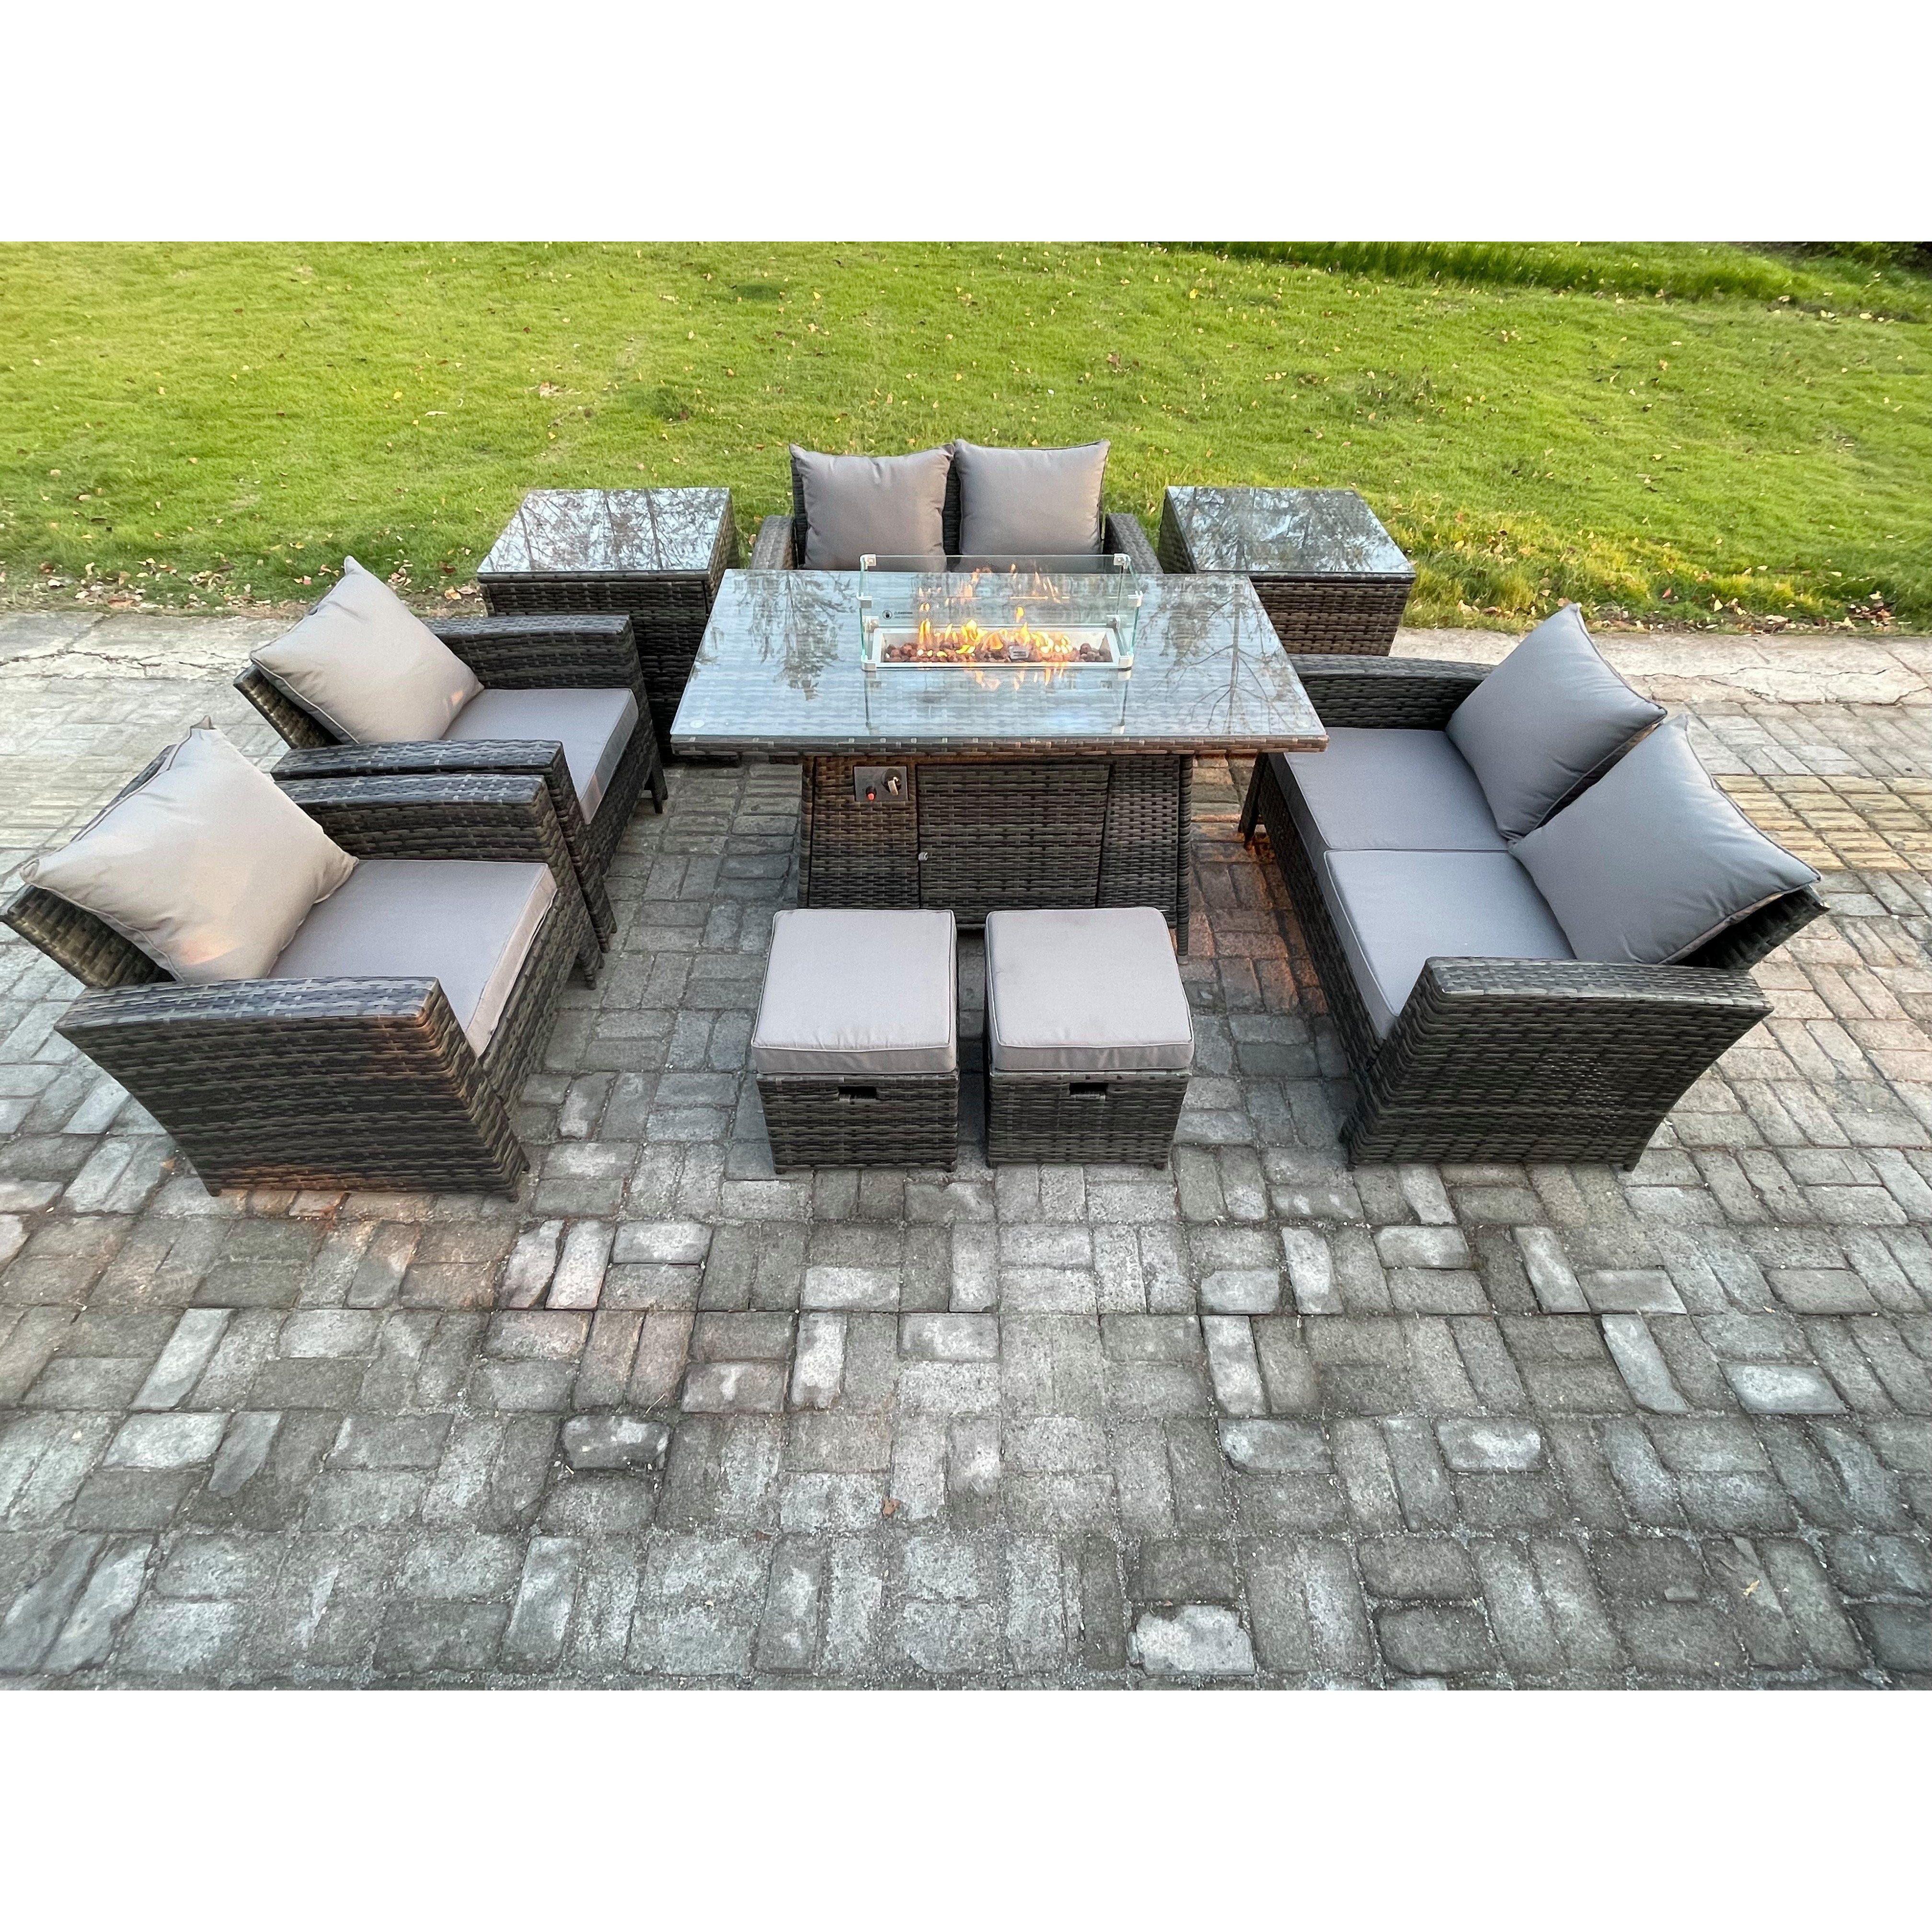 Outdoor Garden Furniture Sets 9 Pieces Wicker Rattan Furniture Gas Firepit Dining Table Sofa Set with 2 Small Footstools - image 1